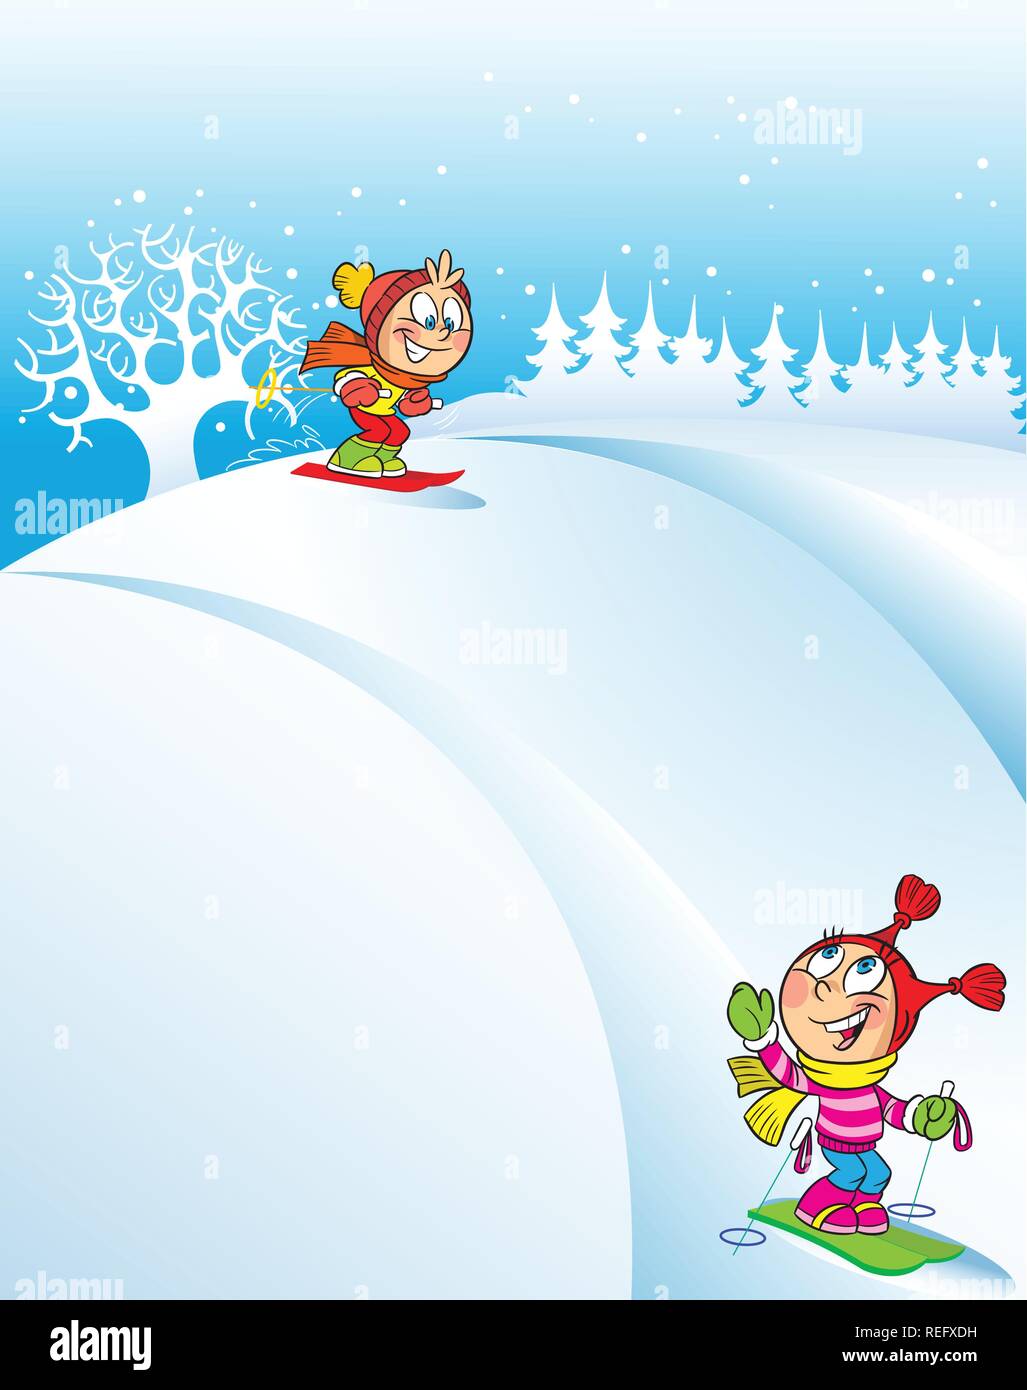 The illustration shows children skiing down the hills in the winter. In the background snowy hill and trees. Illustration done in cartoon style. Stock Vector